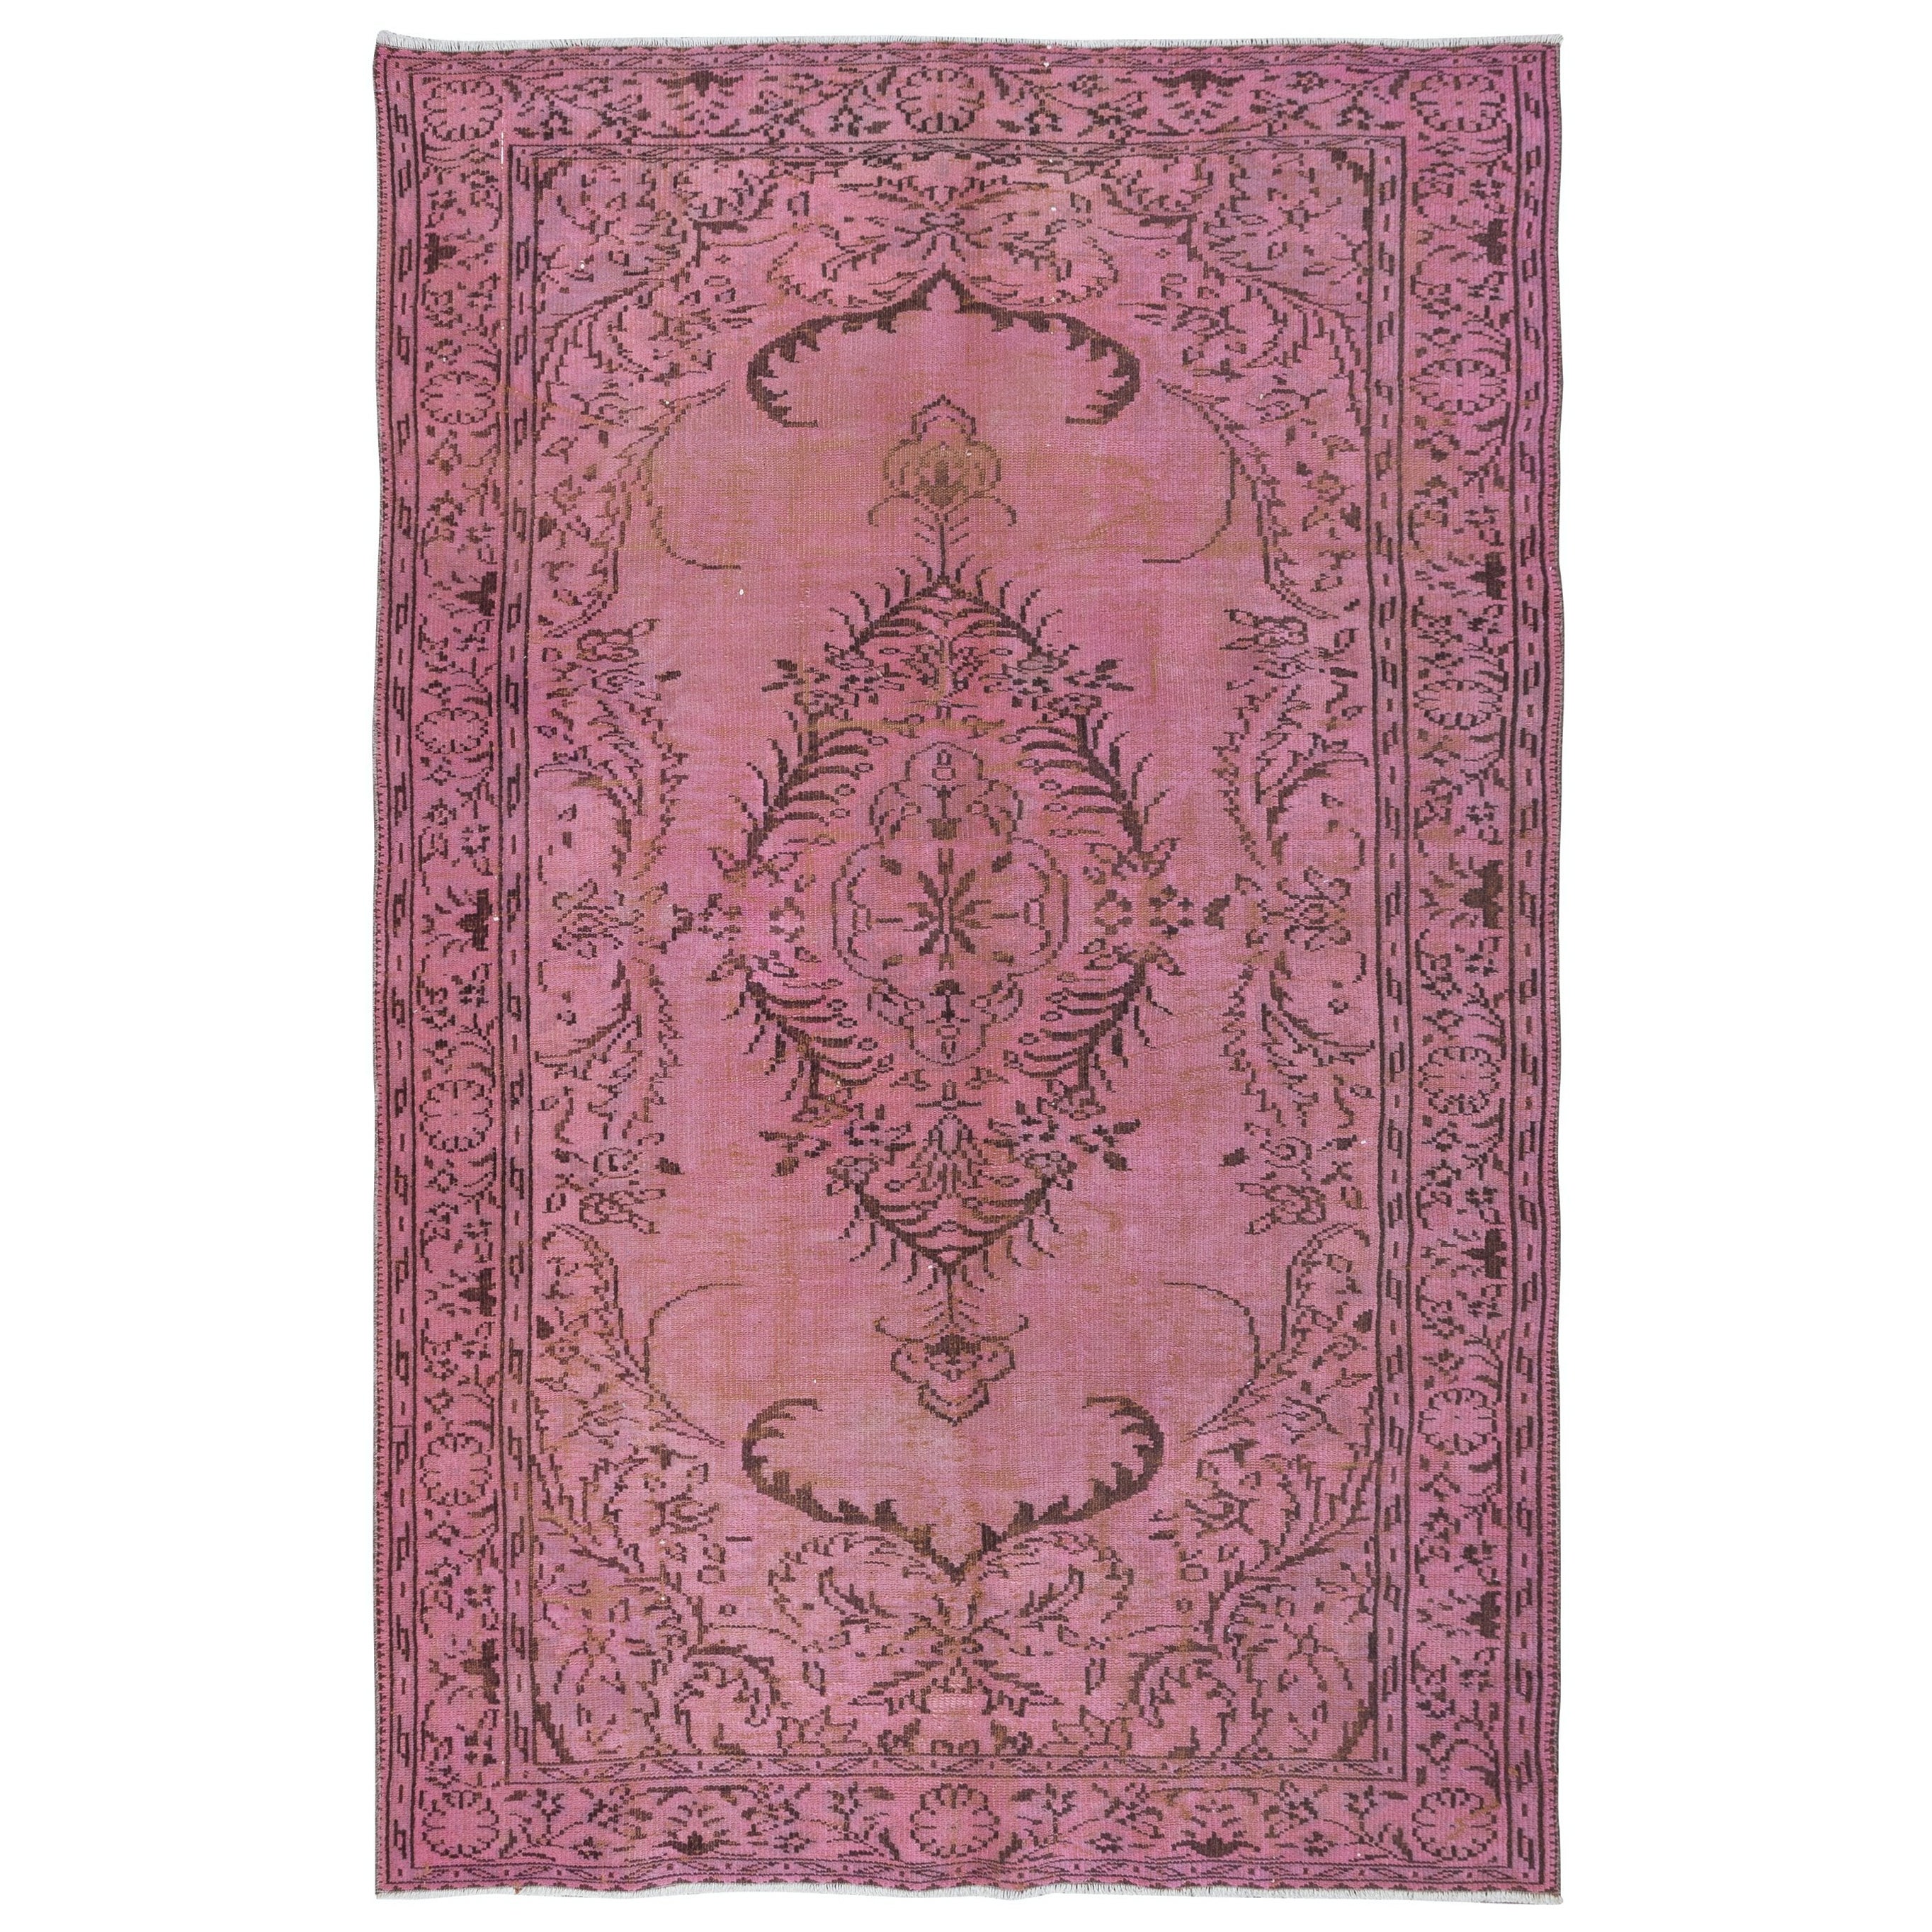 6x9.3 Ft Pink Over-Dyed Handmade Turkish Area Rug for Modern Home & Office Decor